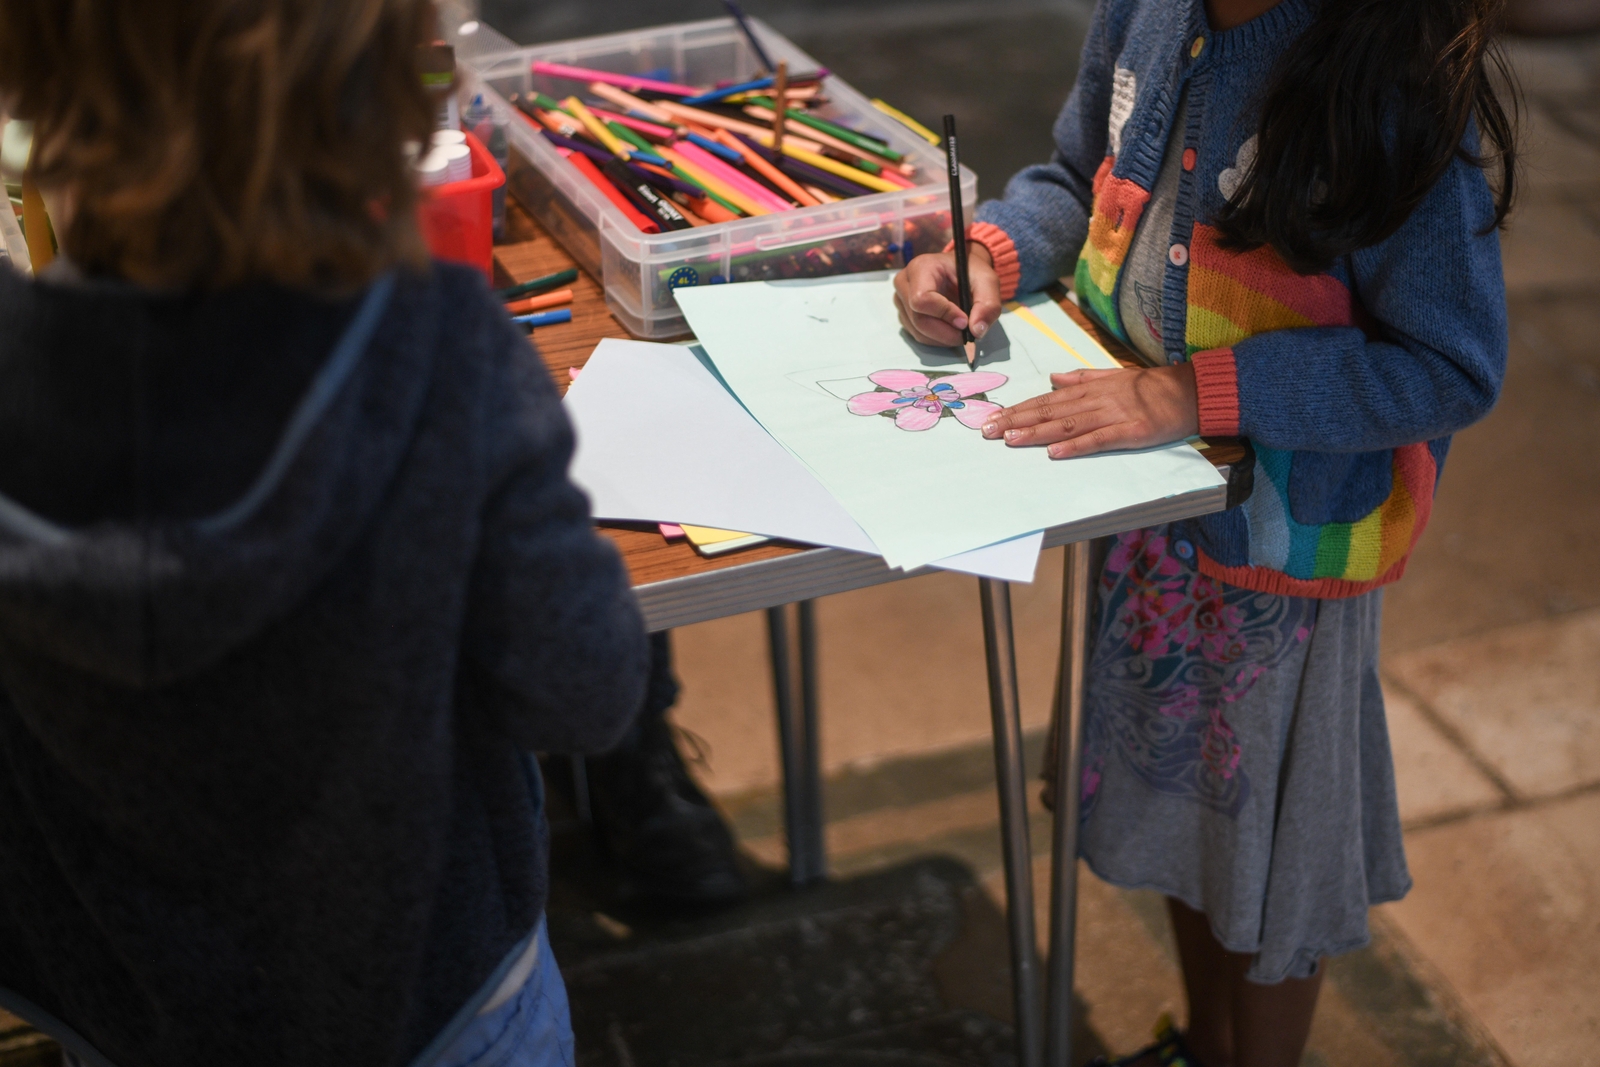 A young girl wearing a rainbow cardigan draws a pink flower on paper using pencils